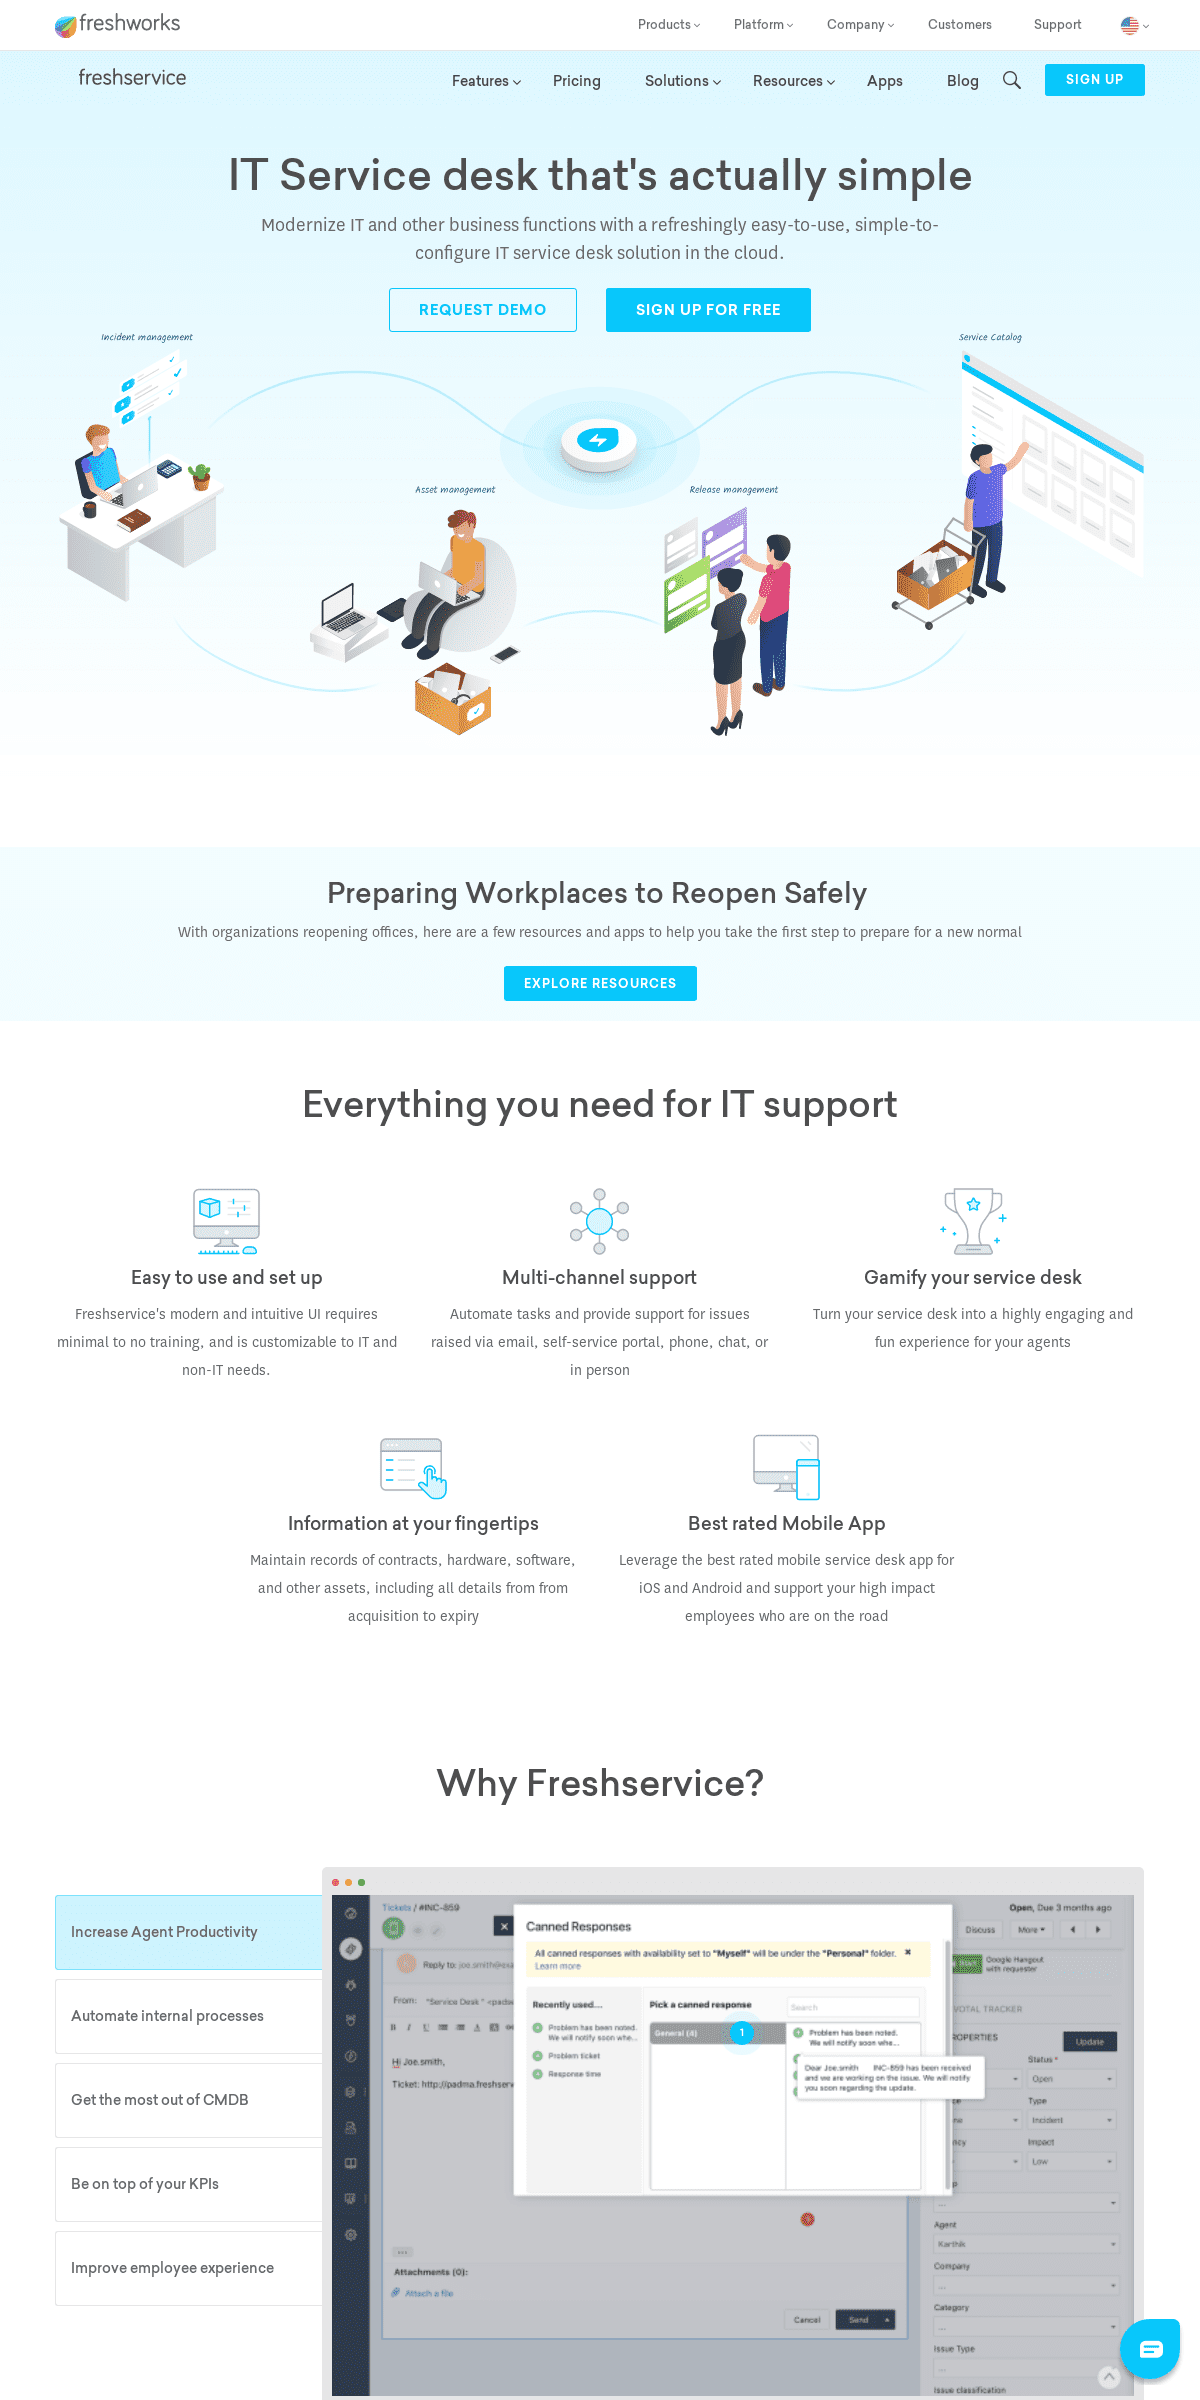 A complete backup of freshservice.com